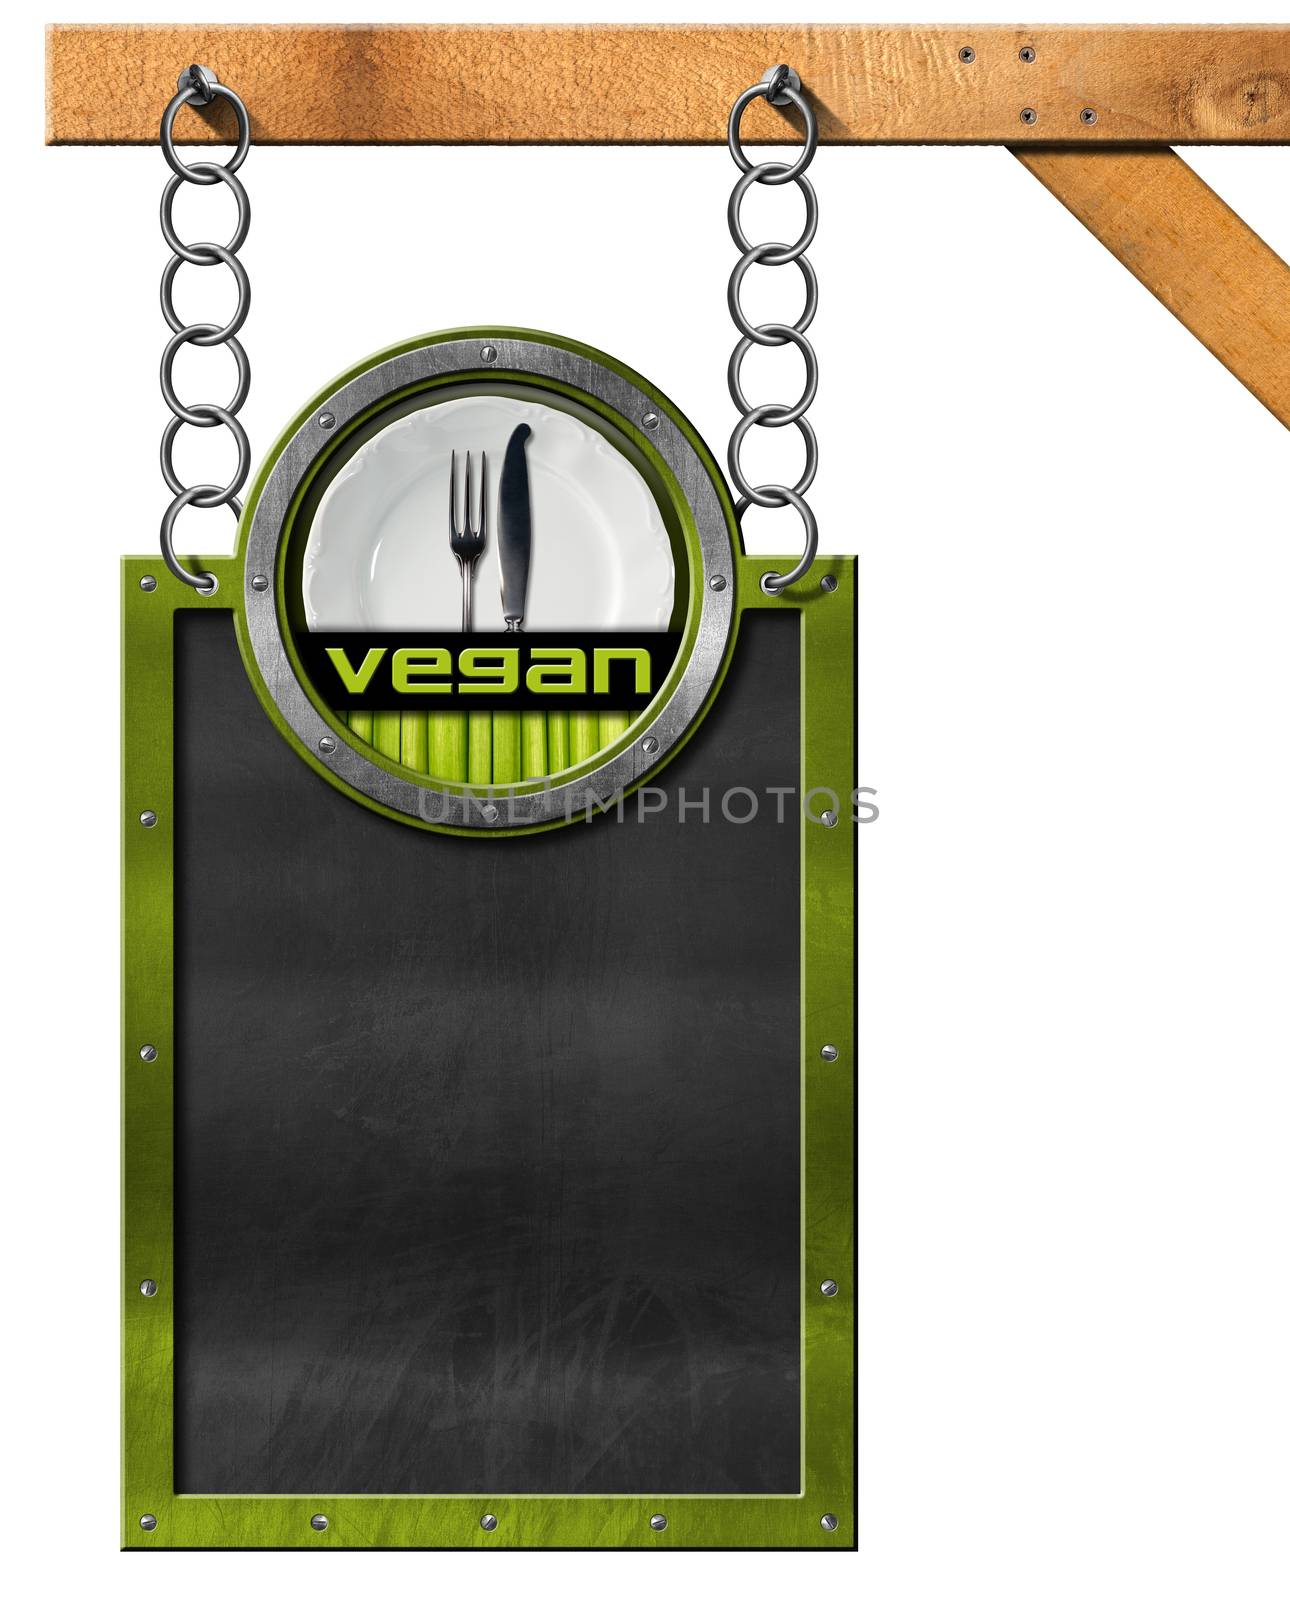 Blackboard with metal frame hanging from a chain on wooden pole, vegan symbol with empty white plate and silver cutlery. Isolated on white background